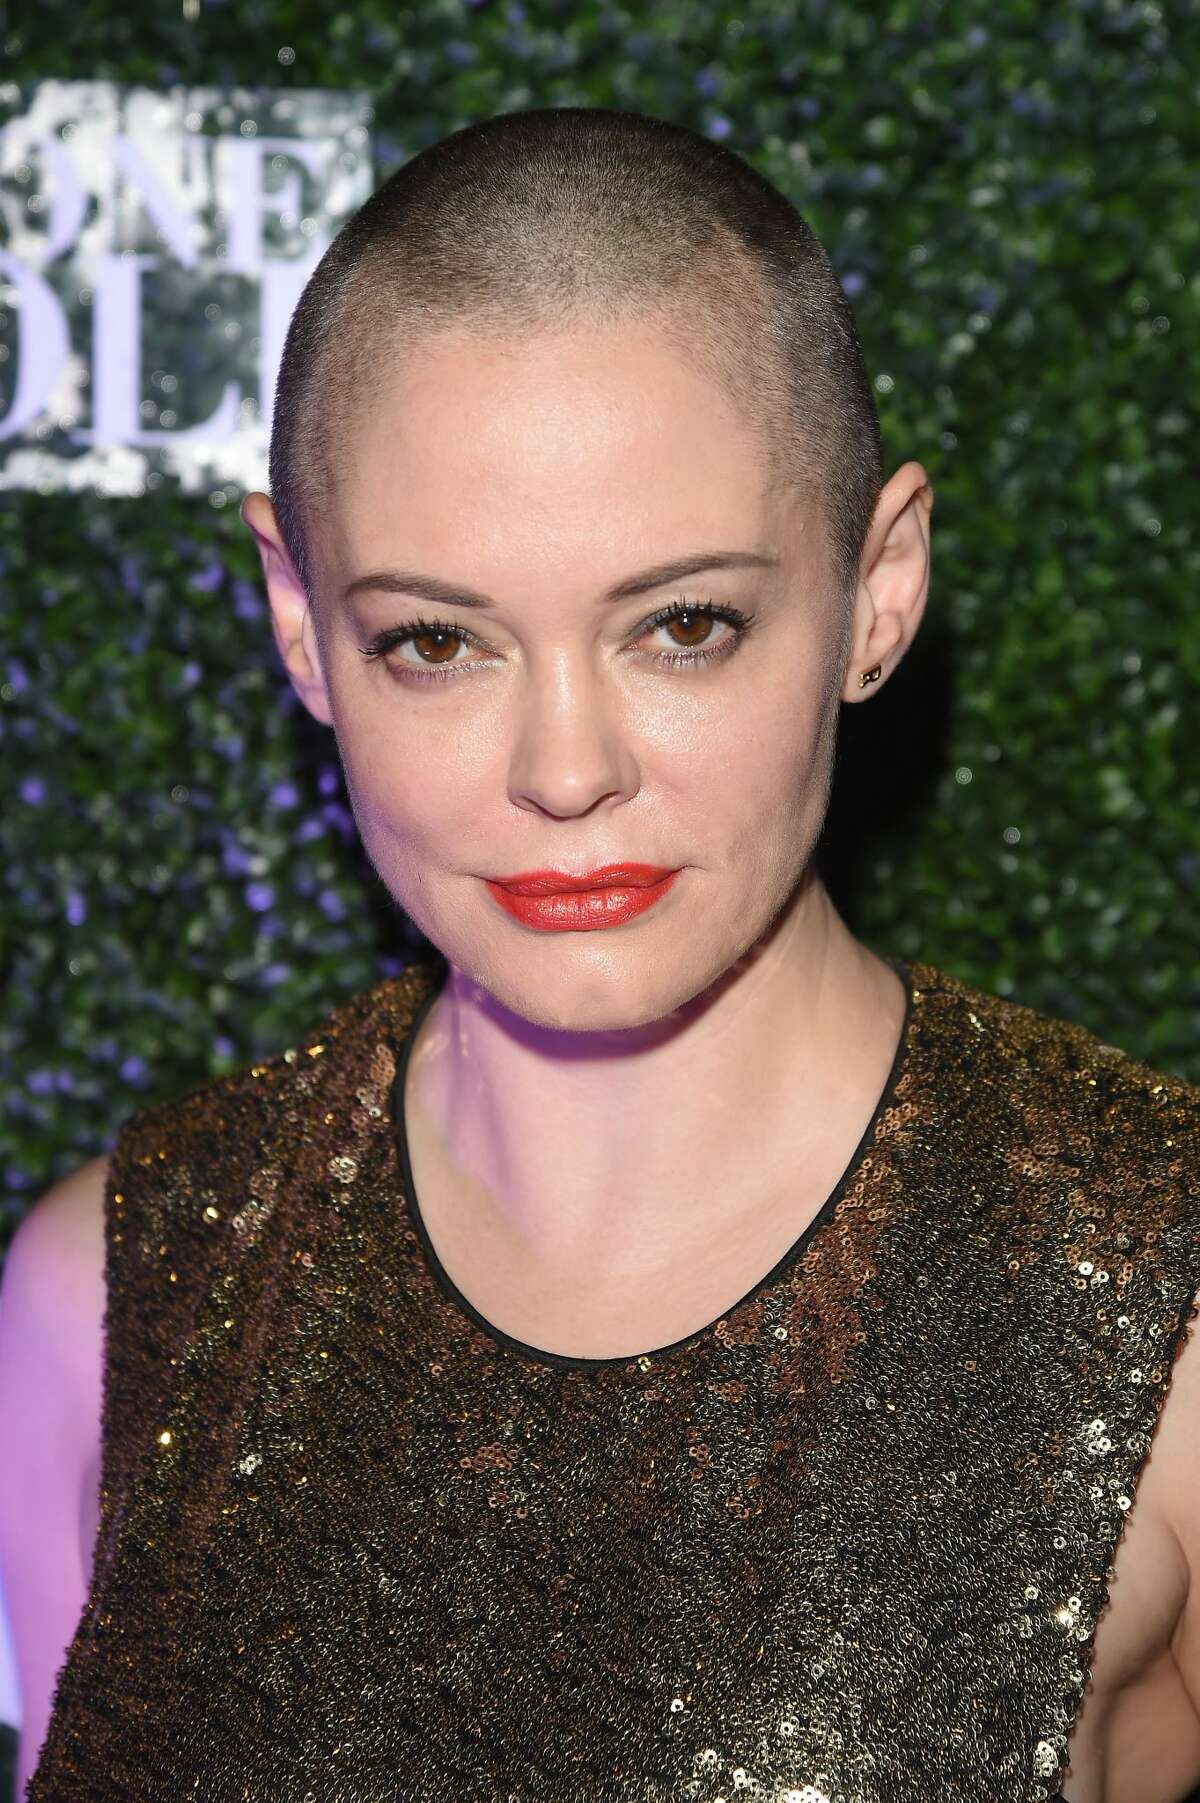 Actress Rose Mcgowan Once A Seattleite And Now A Silence Breaker